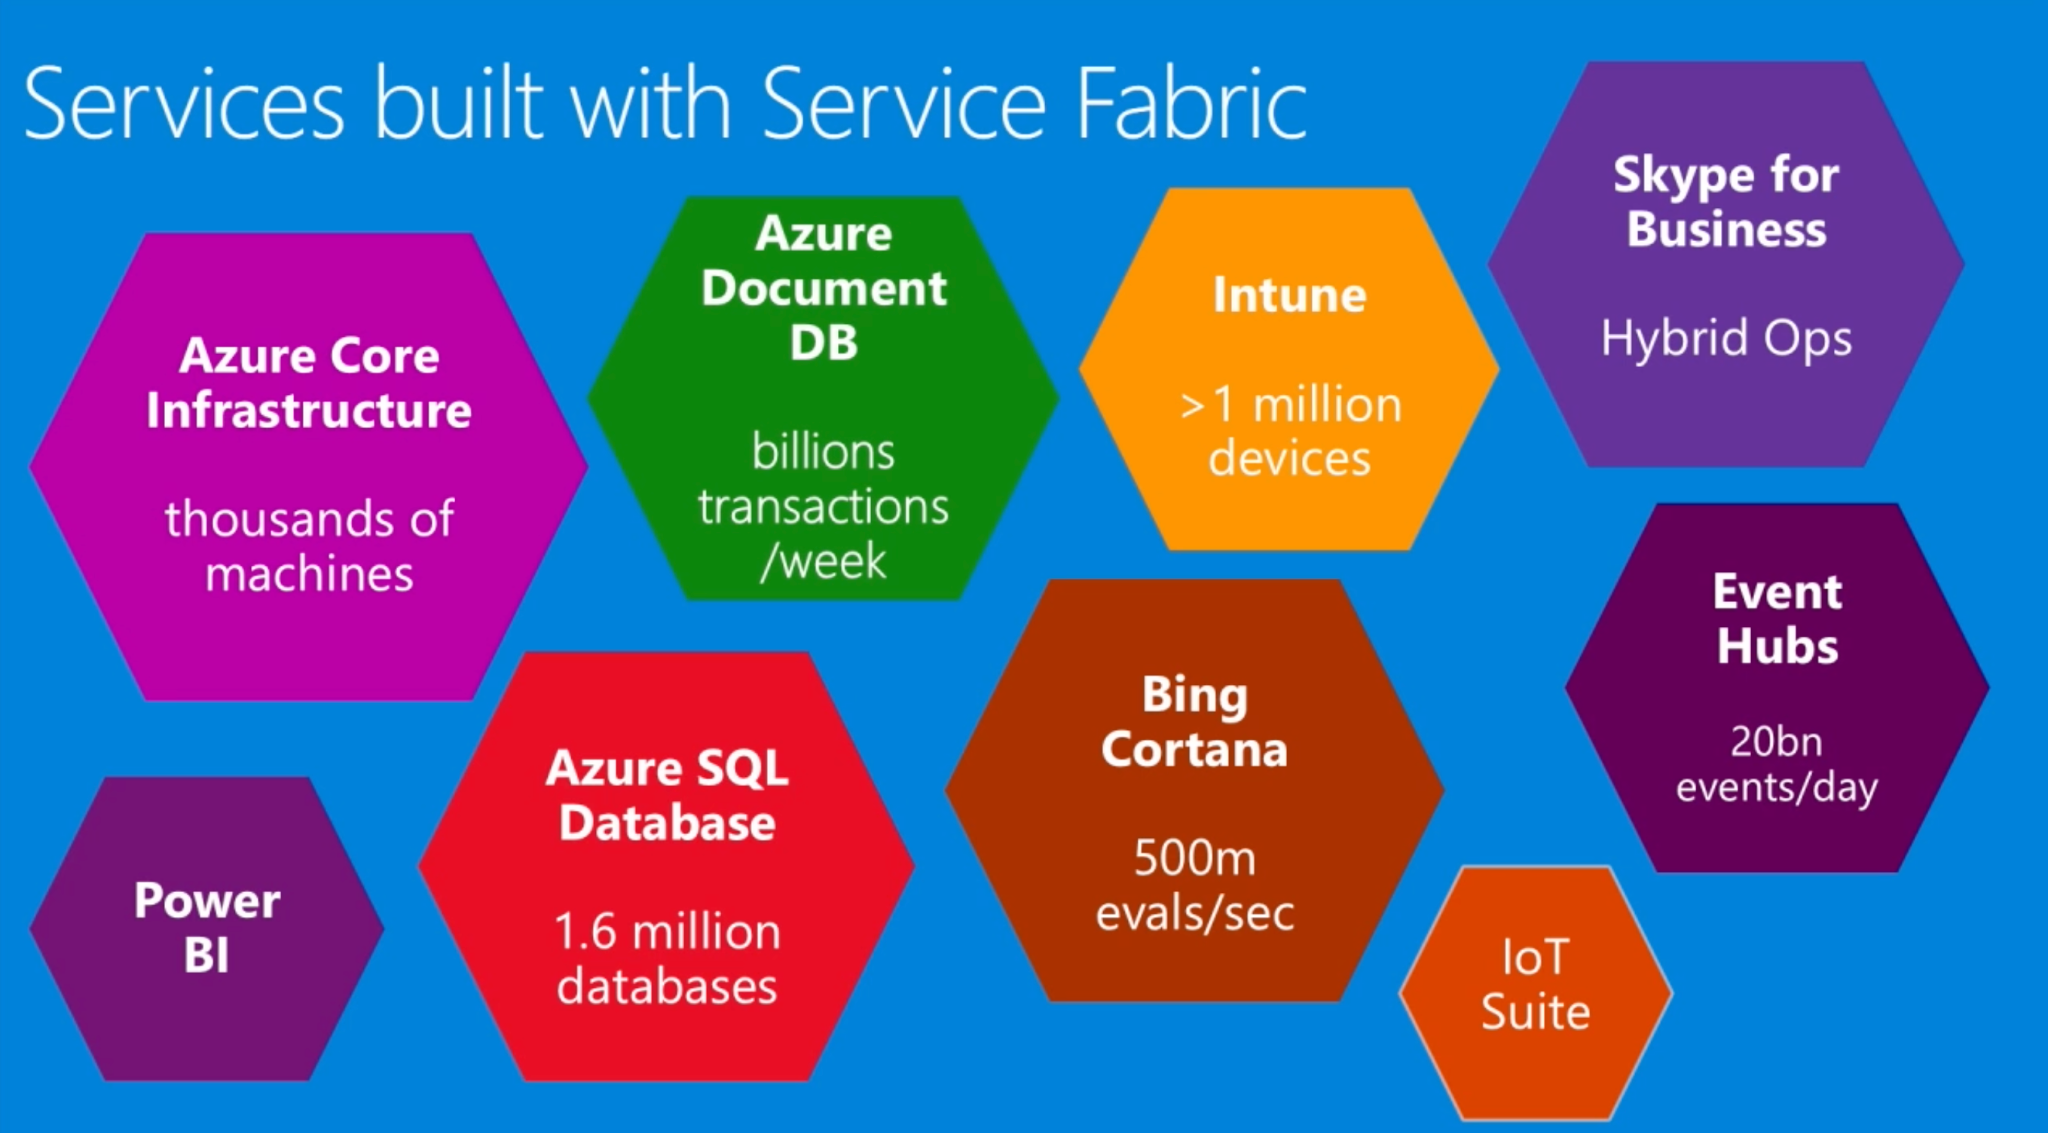 Services powered by Service Fabric shown in the diagram include Azure Core Infrastructure, Azure Document DB, Intune, Skype for Business, Event Hubs, Bing Cortana, Azure SQL Database, Power BI, IoT Suite